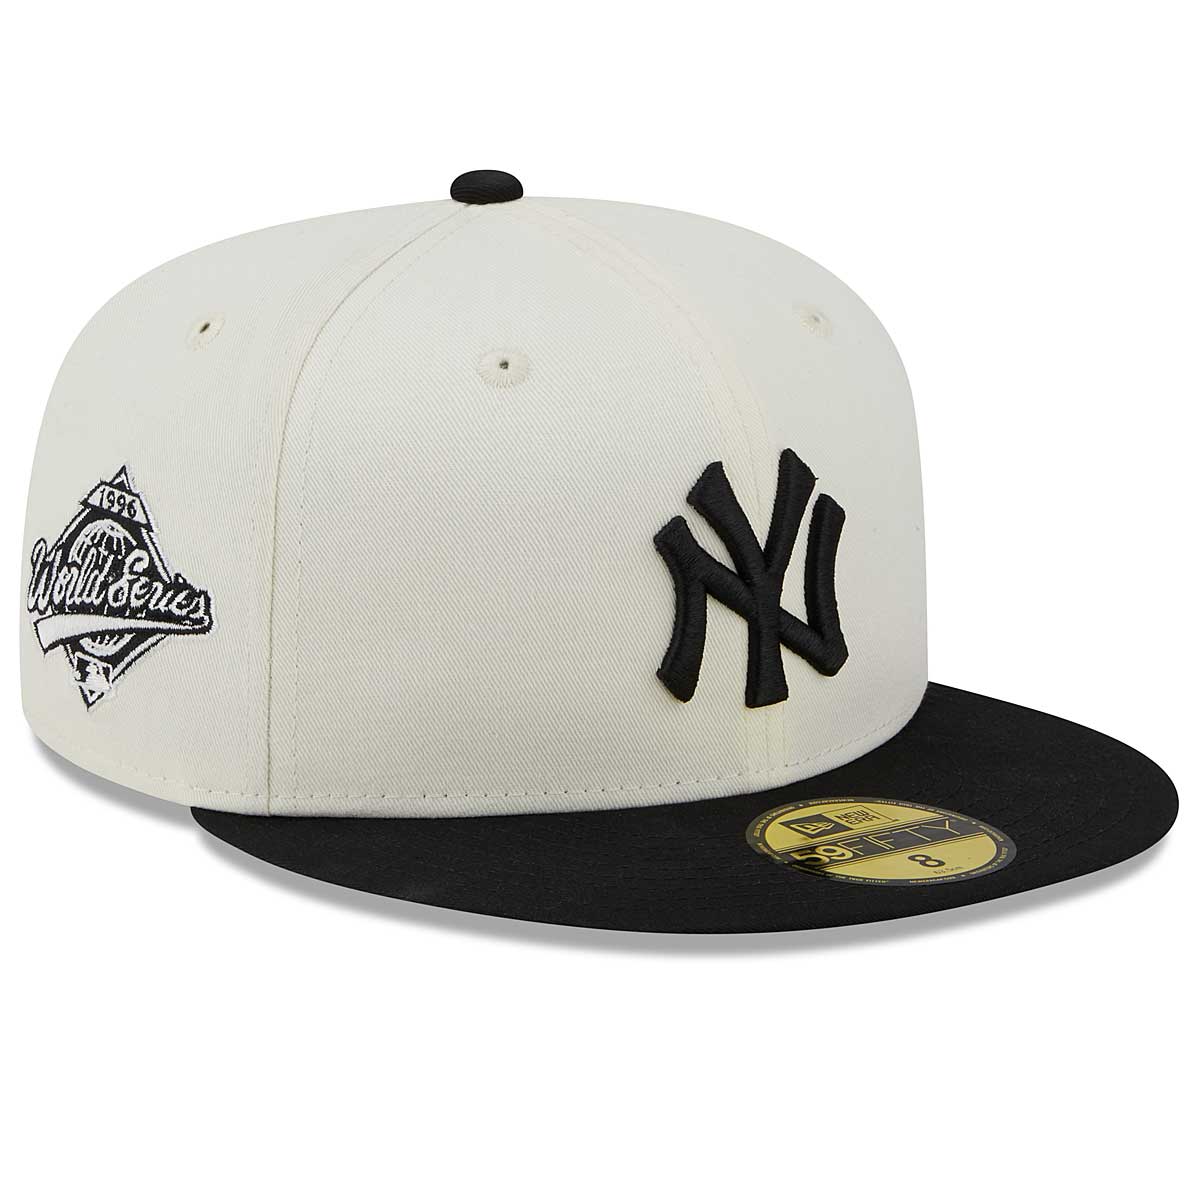 Buy MLB NEW YORK YANKEES CHAMPIONSHIPS 59FIFTY CAP for EUR 43.95 on ...